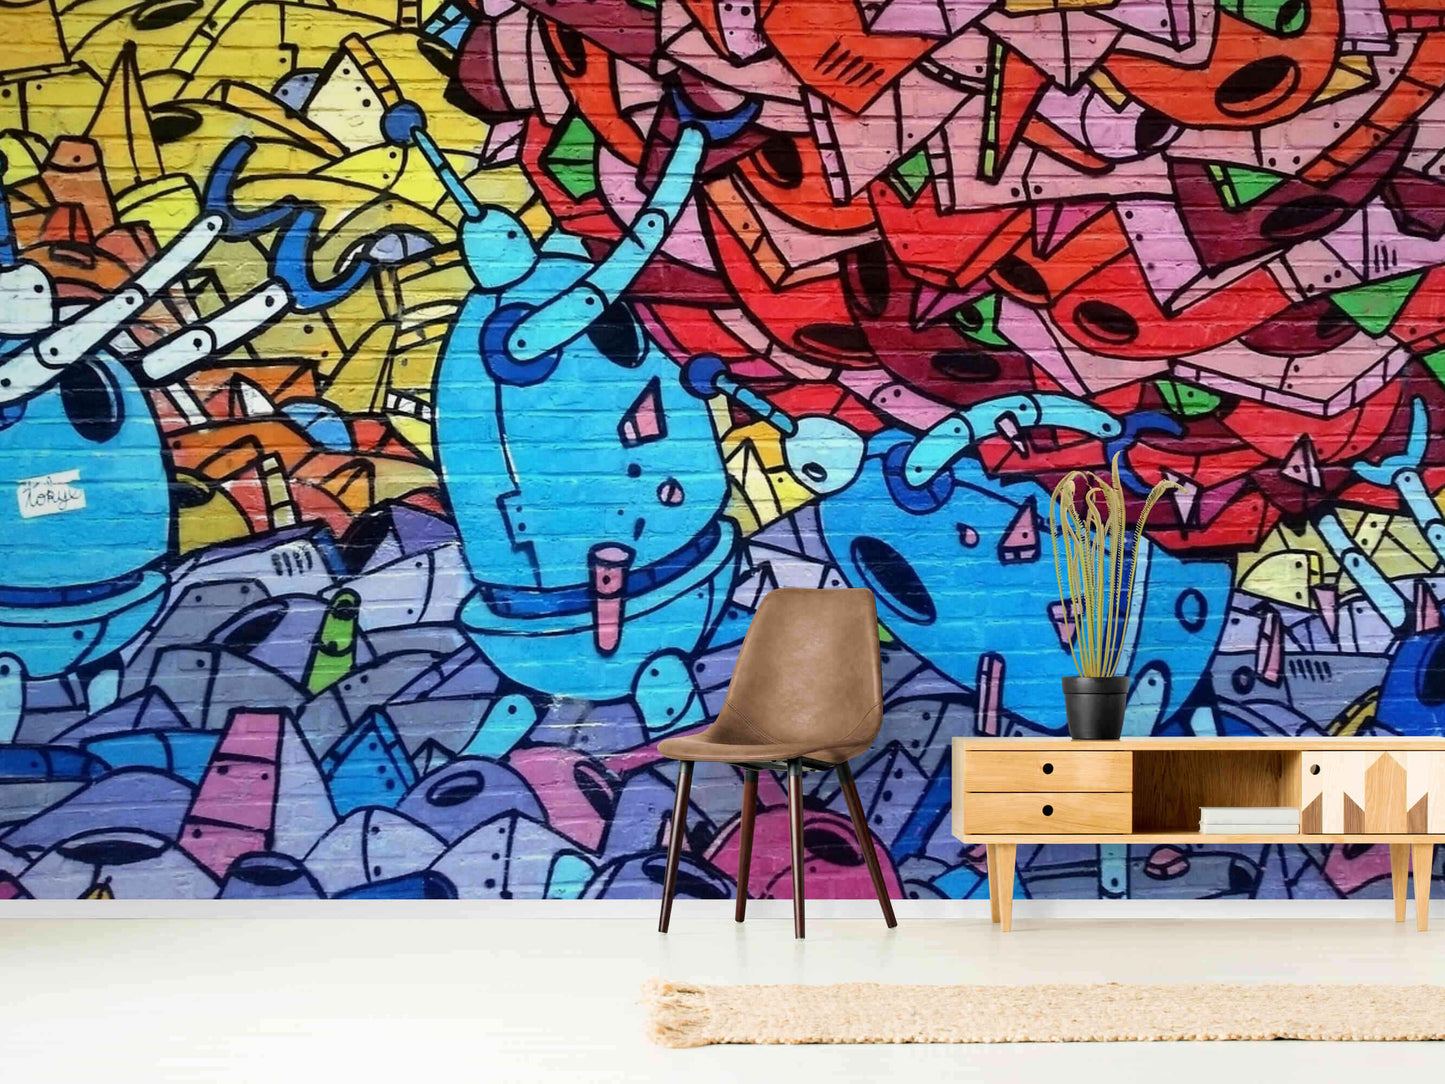  Expressive and colorful street art graffiti creating a unique bedroom atmosphere.